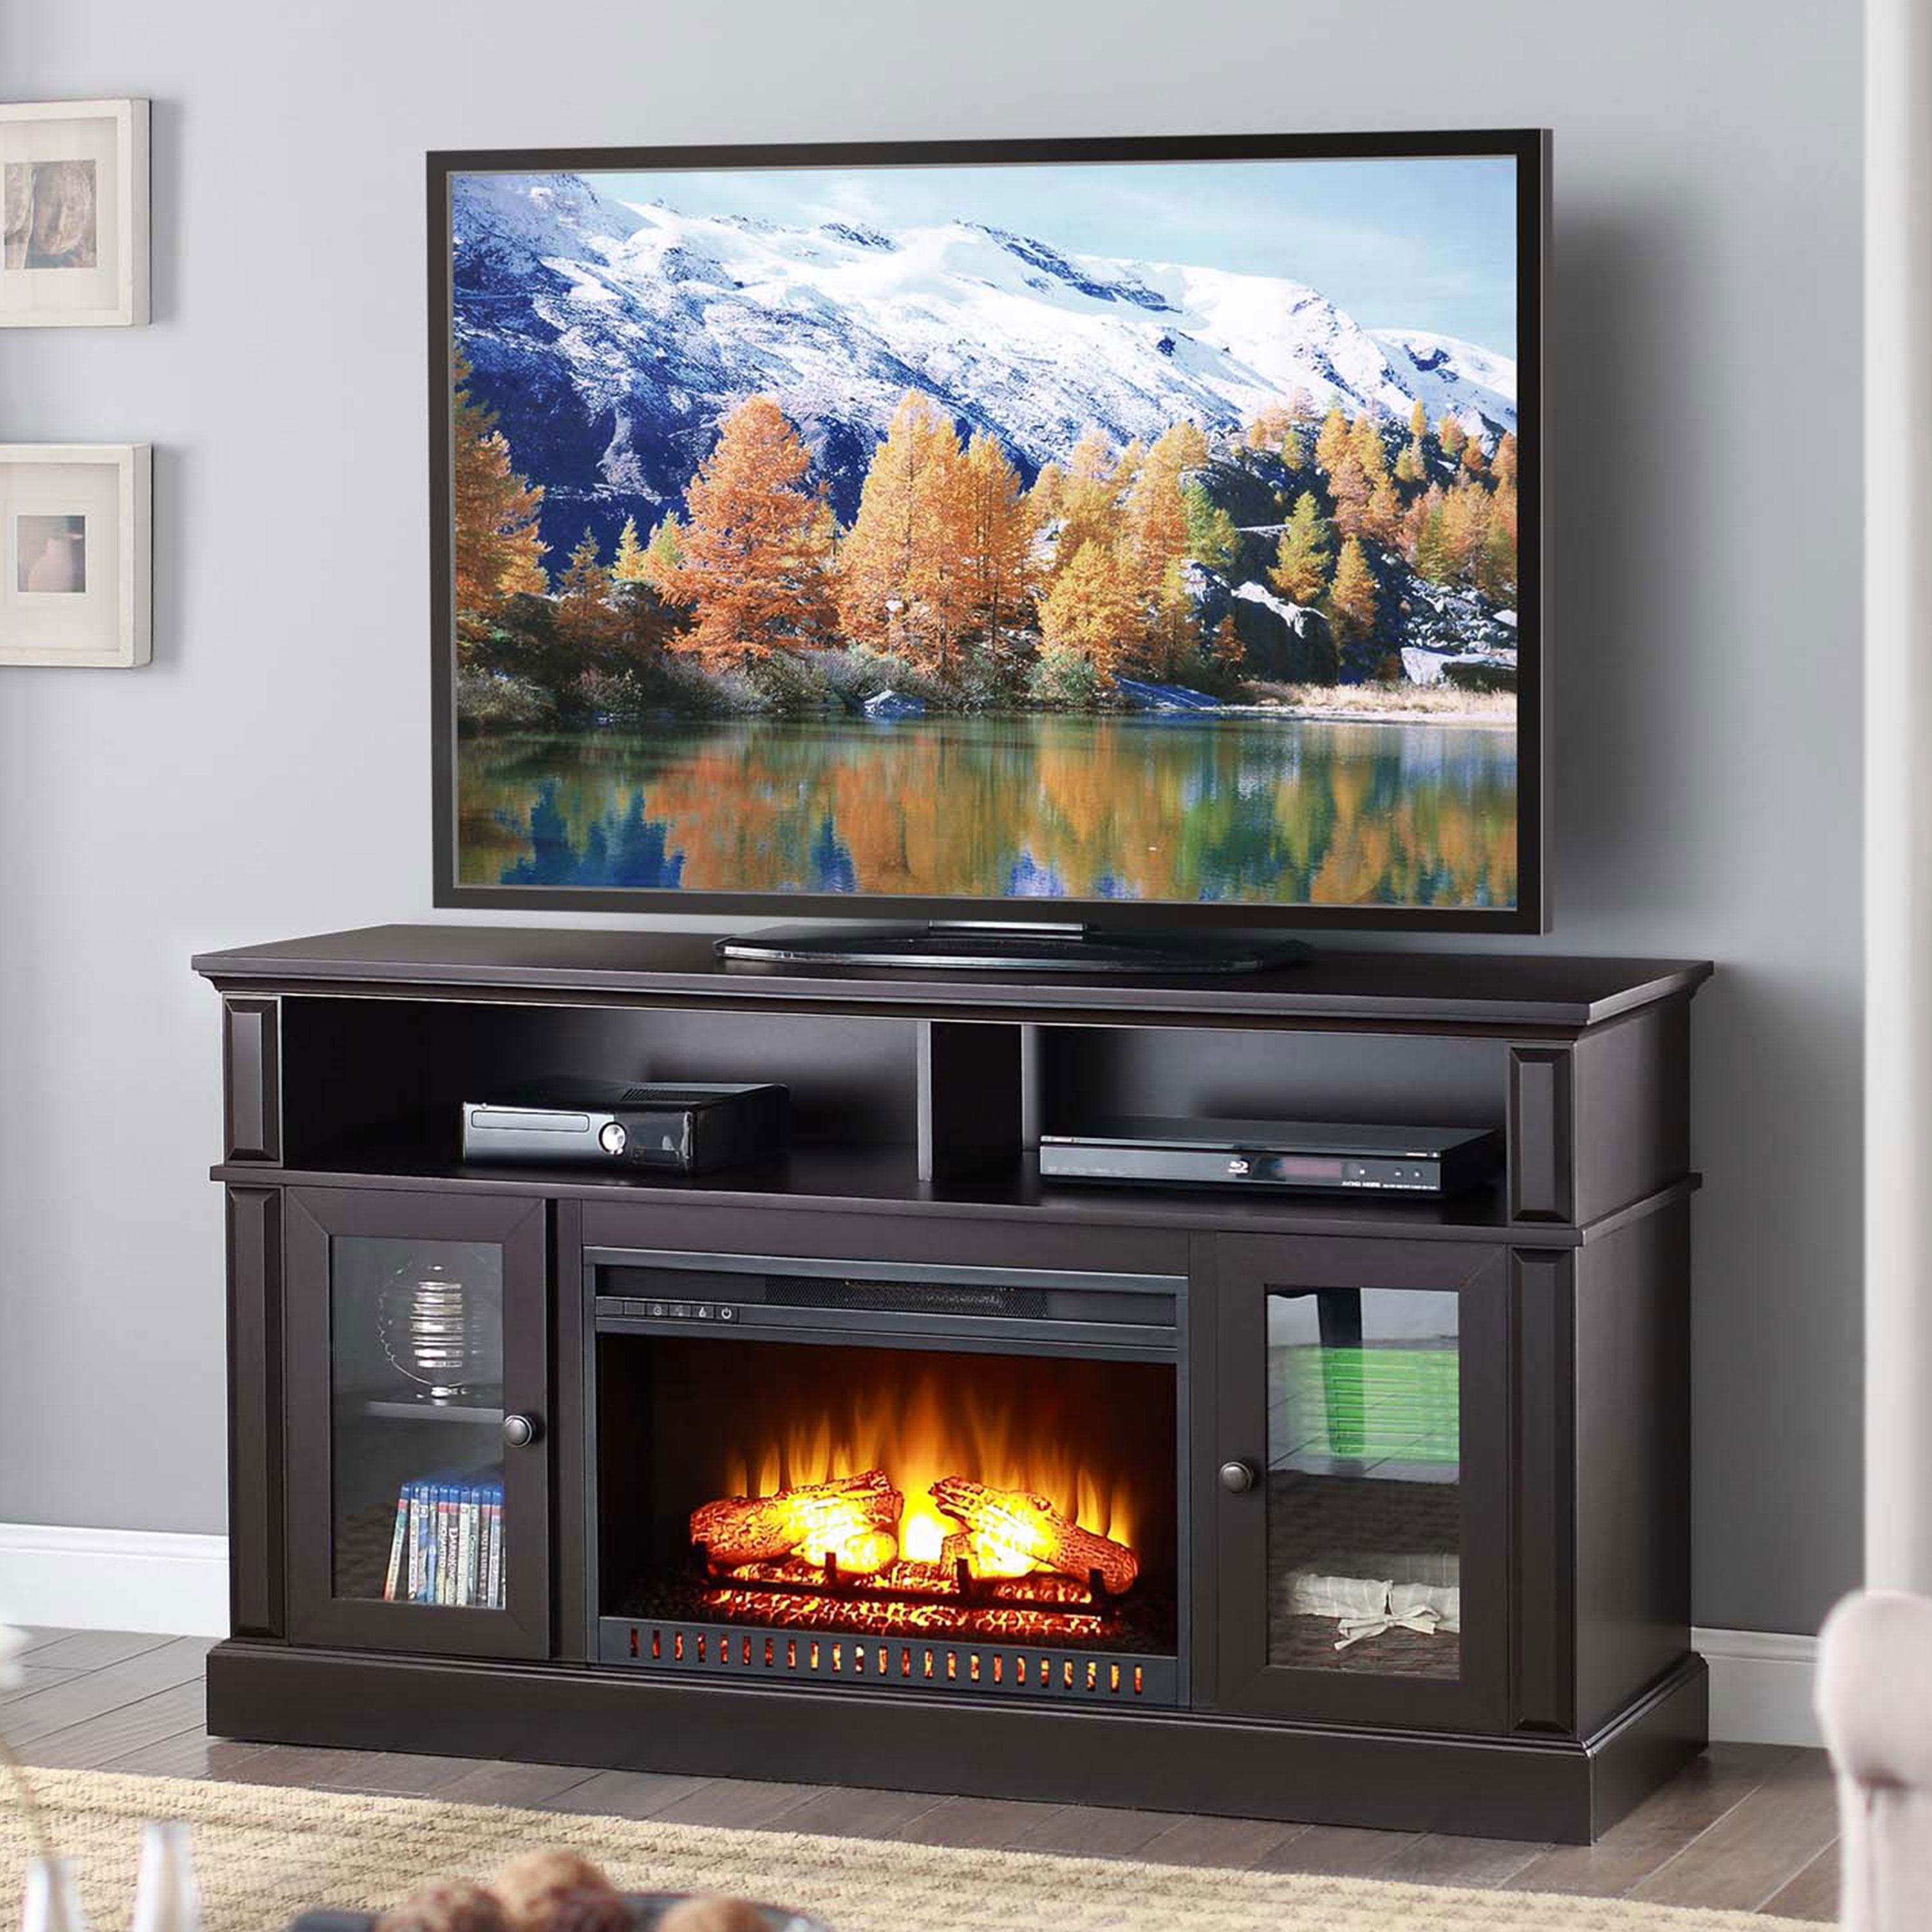 Sams Club Electric Fireplace Luxury Whalen Barston Media Fireplace for Tv S Up to 70 Multiple